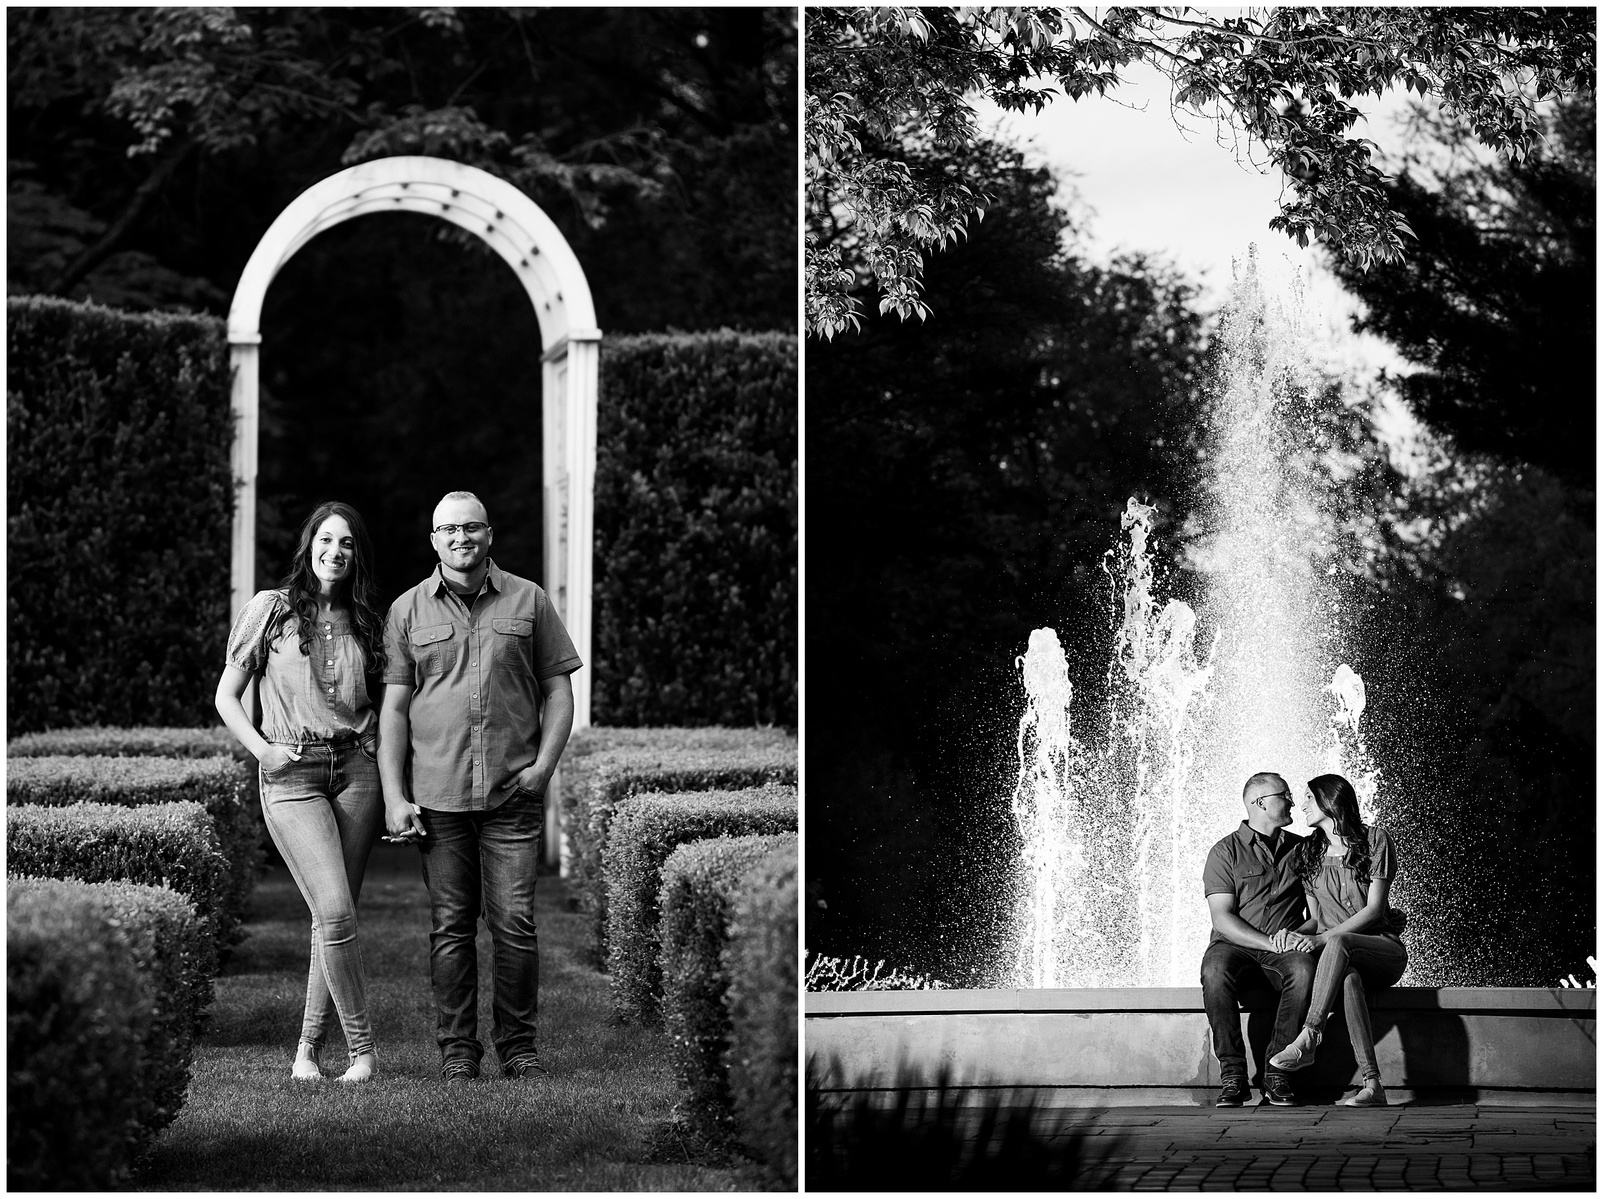 Millcreek Park Youngstown OH engagement session, Fellows Riverside Gardens engagement session, Engagement session Youngstown OH, Youngstown OH wedding photographer, Engagement photographer in Youngstown, Millcreek Park, Ohio wedding photographer